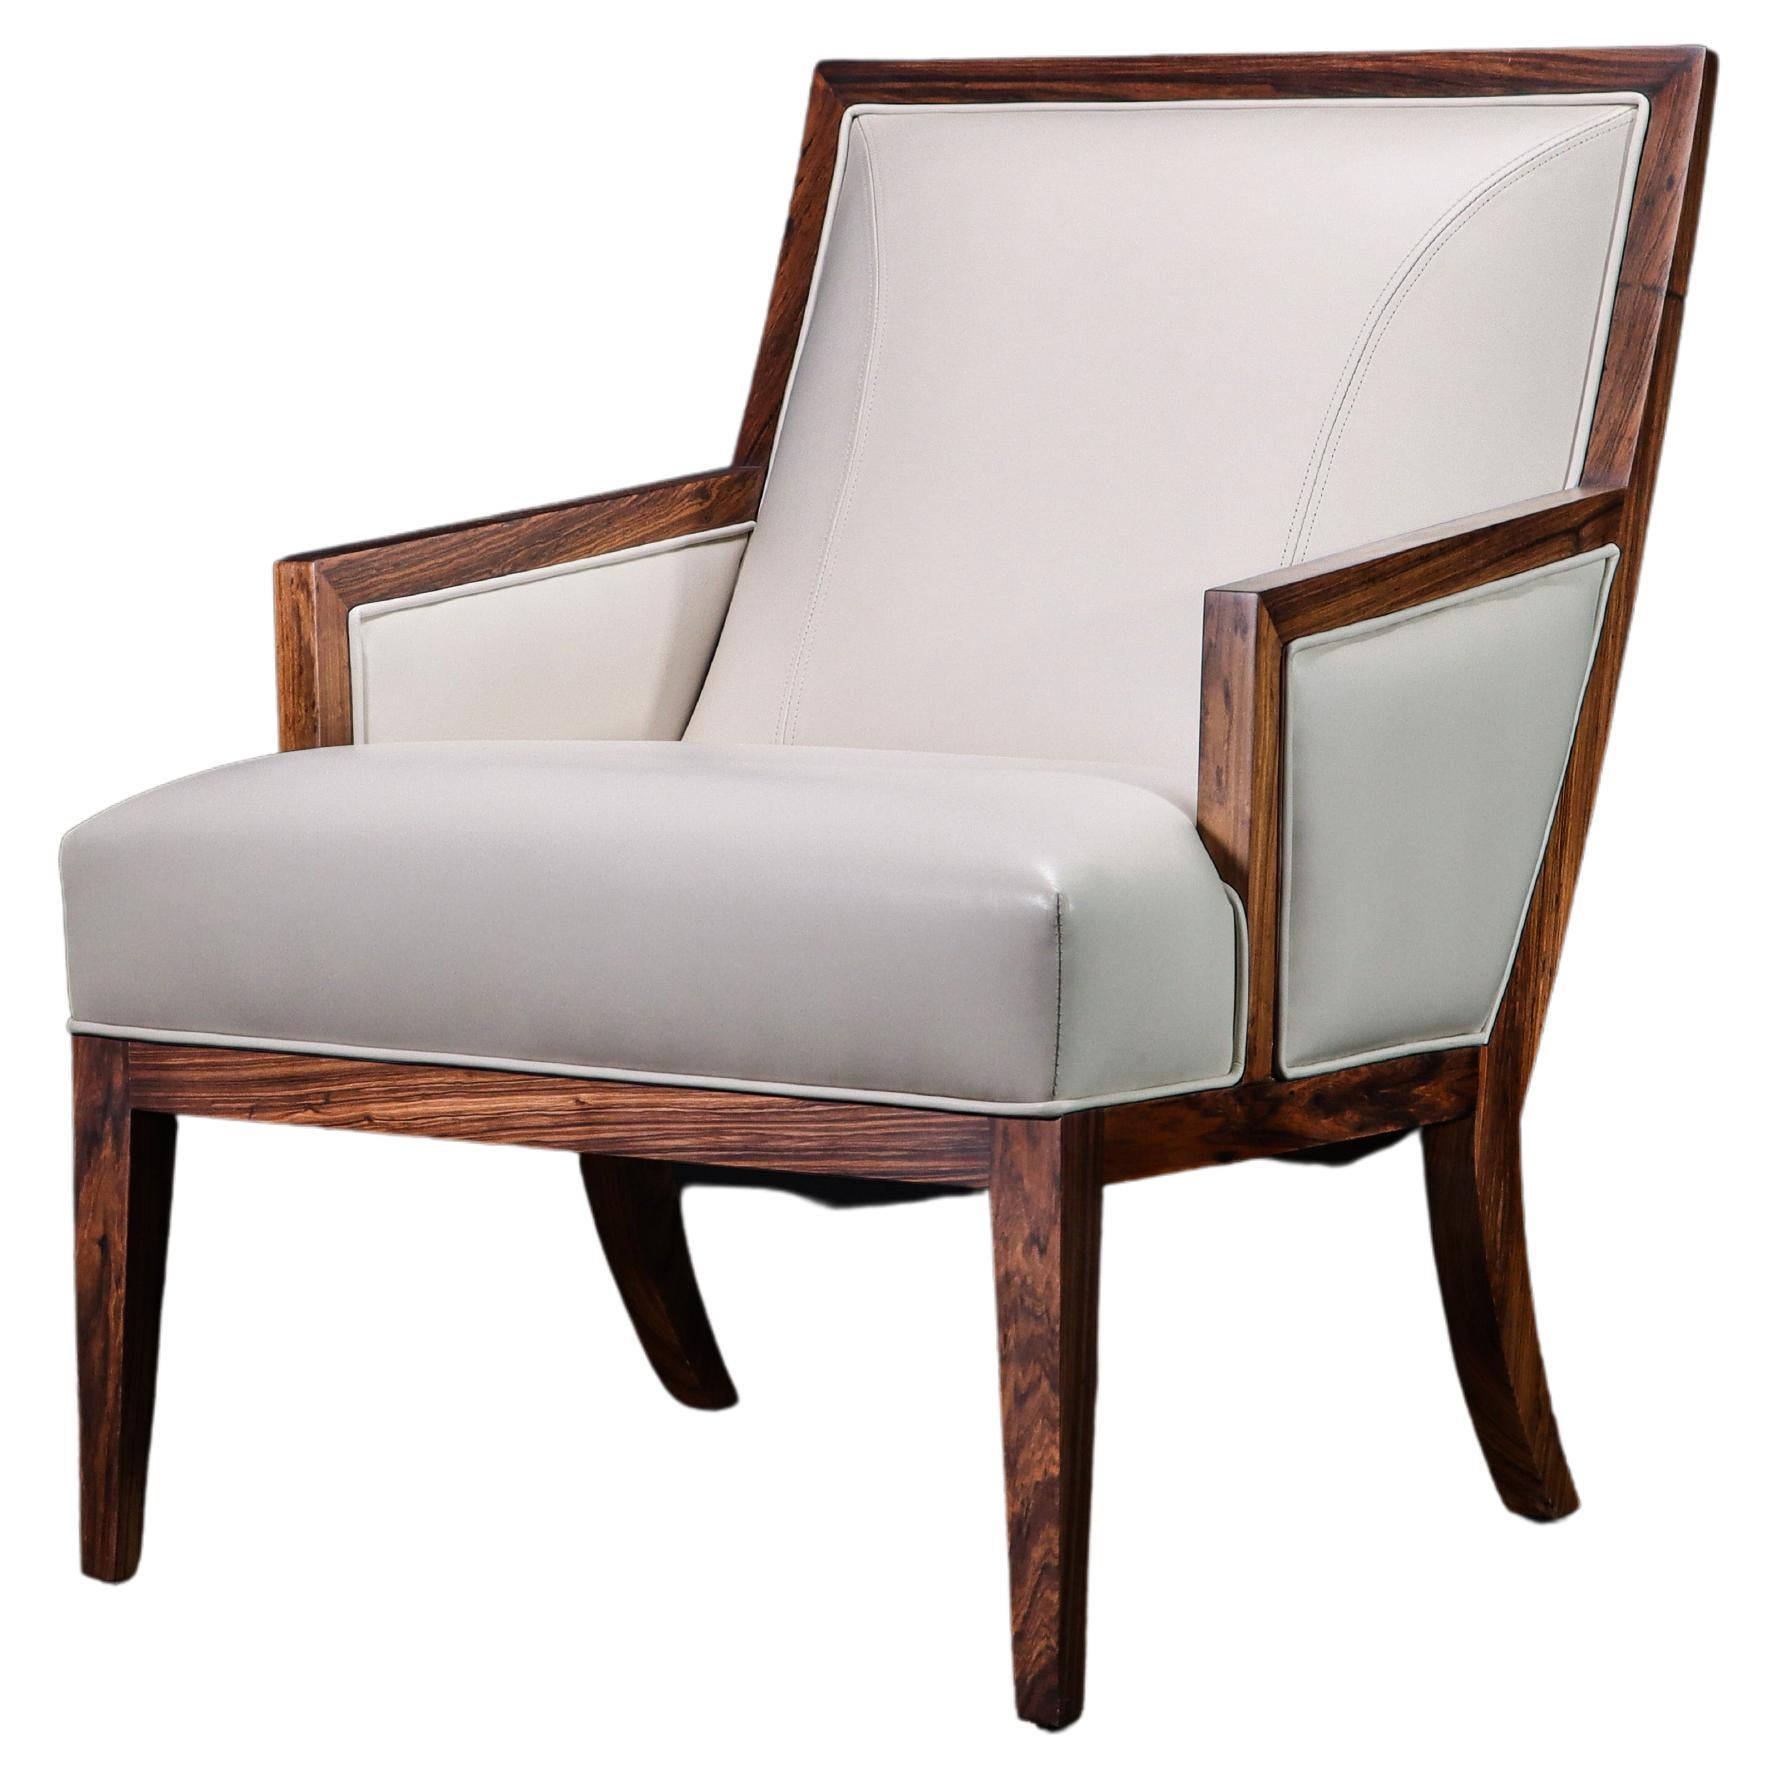 Contemporary Lounge Chair in Wood and White Leather from Costantini, Belgrano For Sale